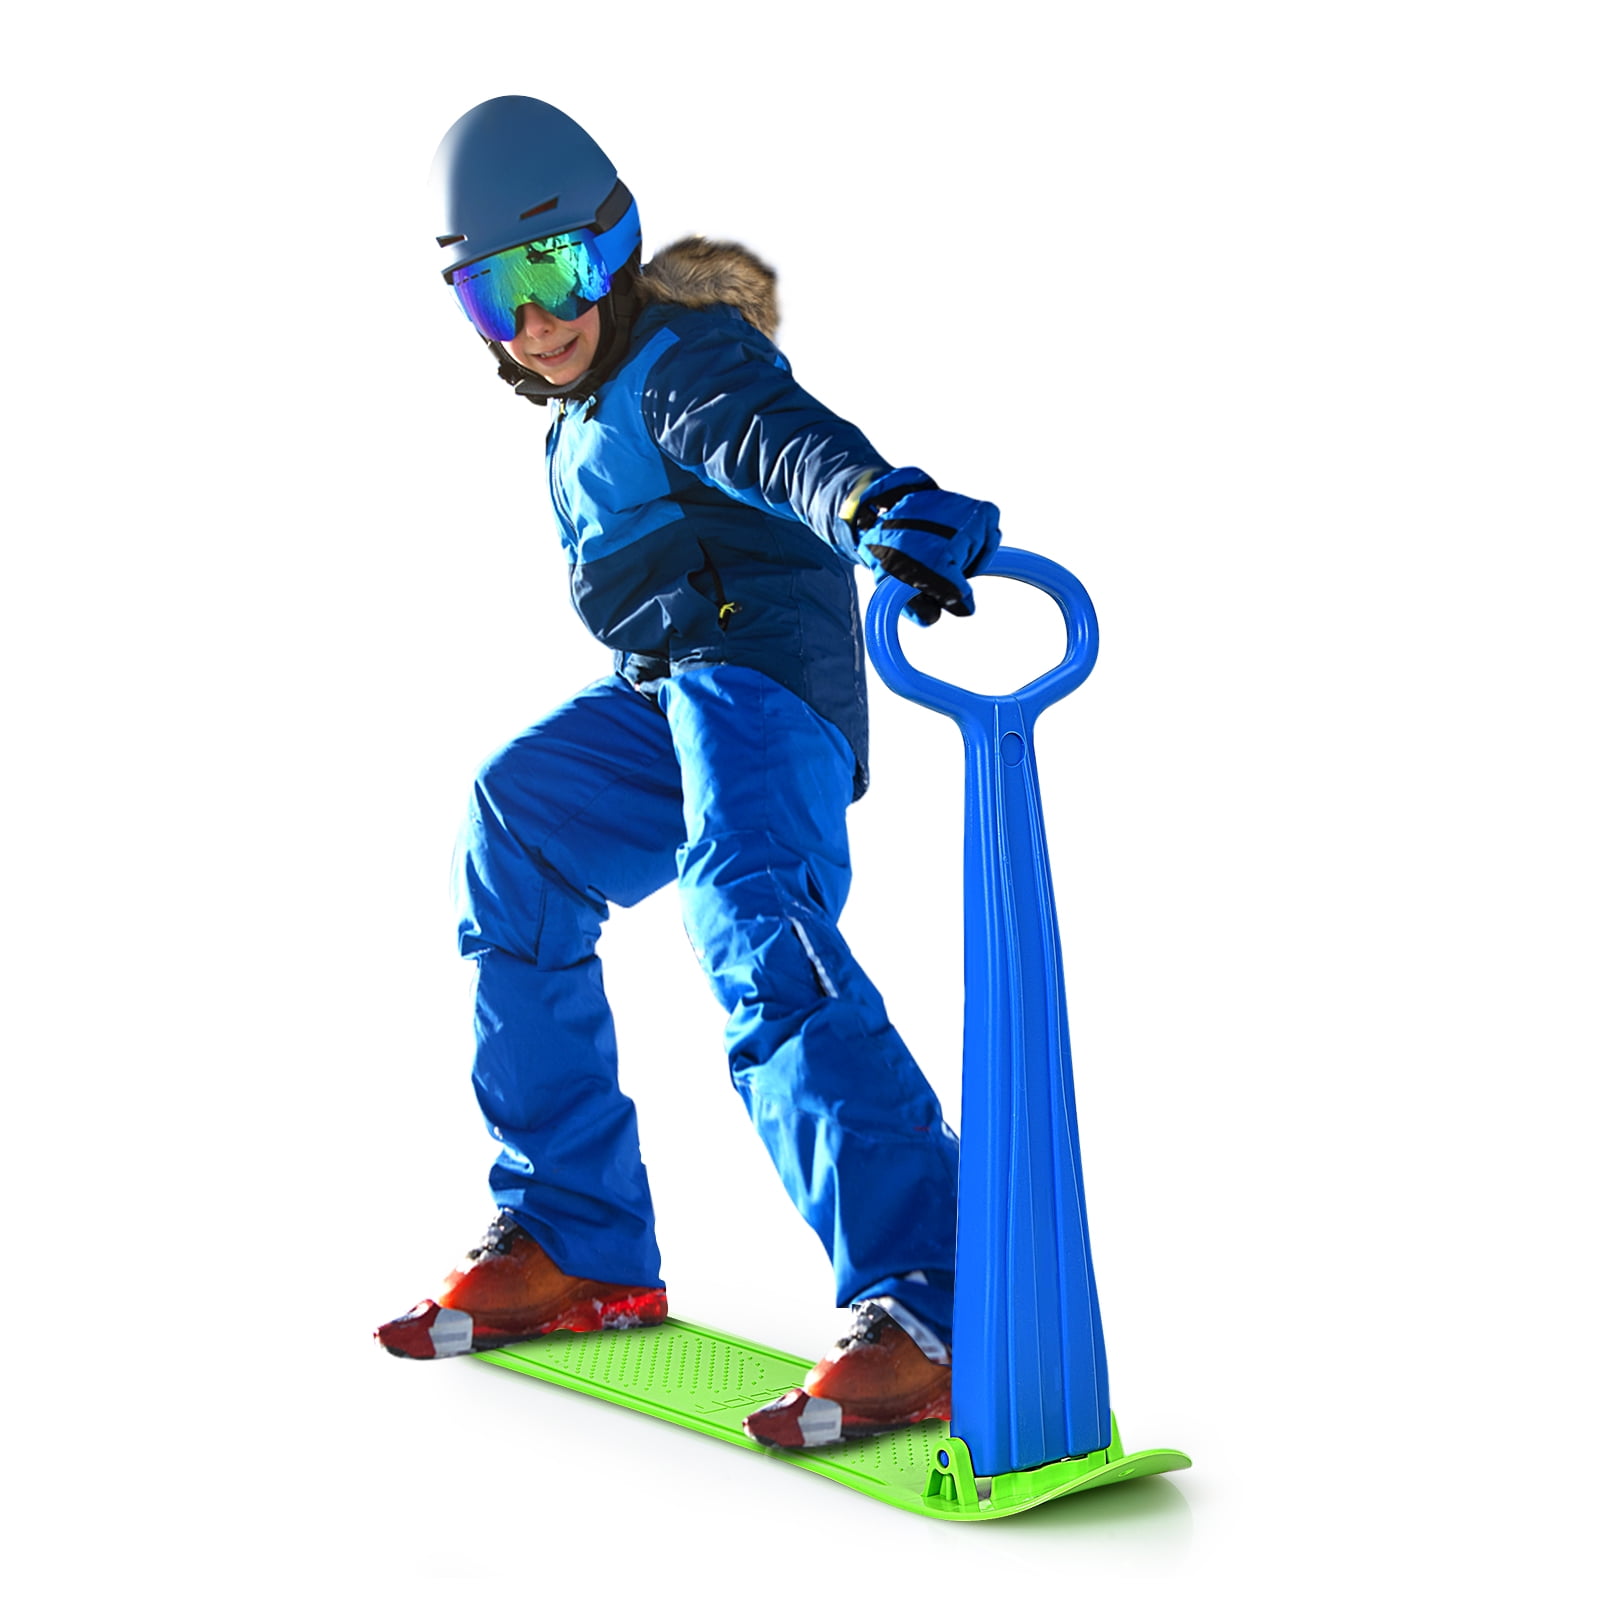 Kingmys Snowboard Scooter for Kids Folding Snow Ski Sled with Grip Handle Green 